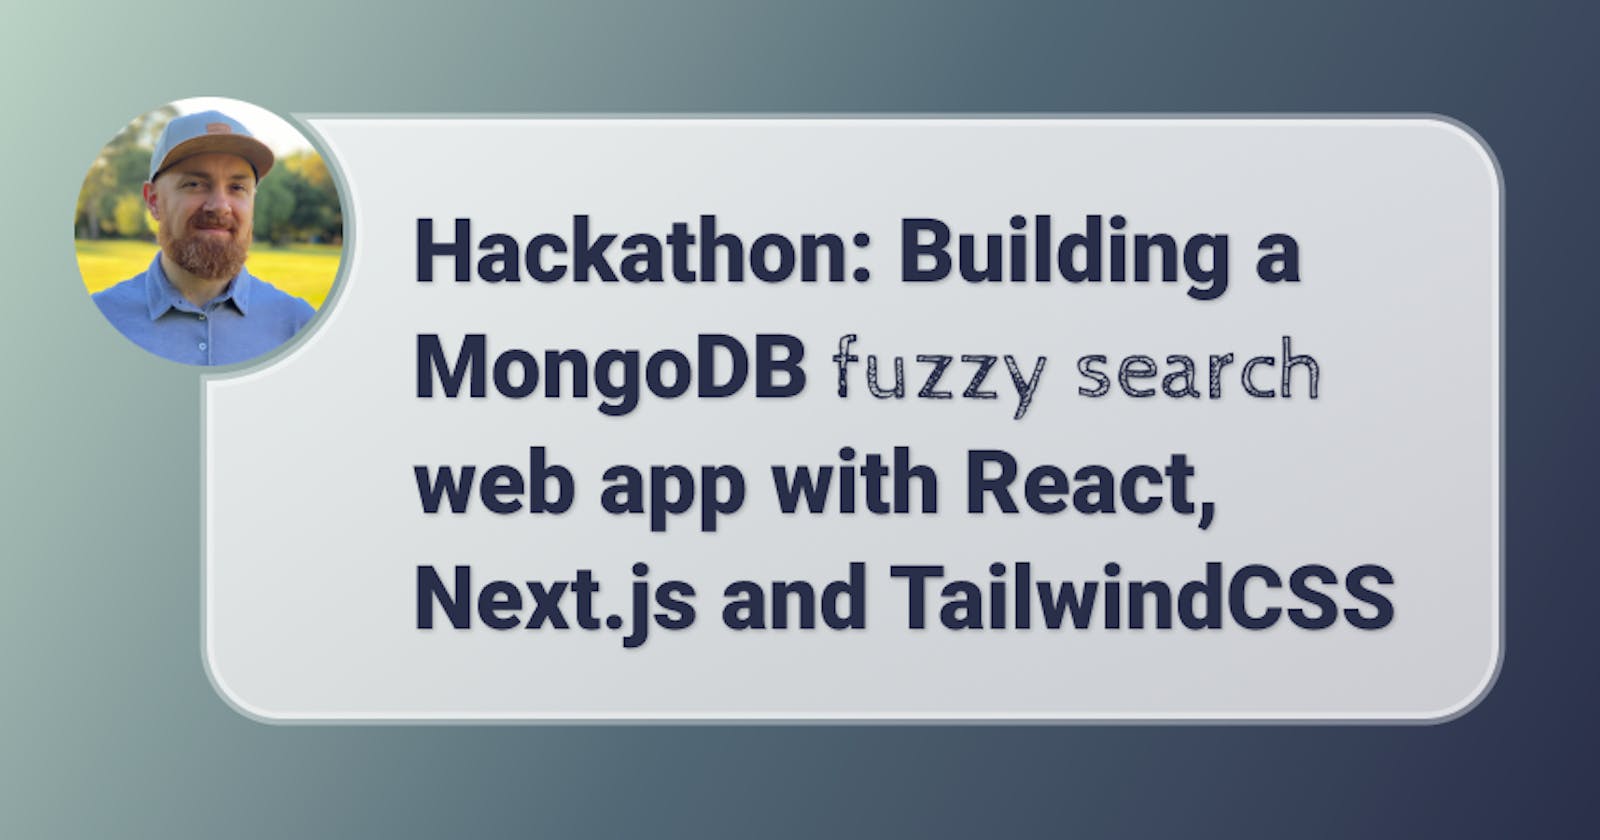 Hackathon: Building a MongoDB fuzzy search web app with React, Next.js and TailwindCSS